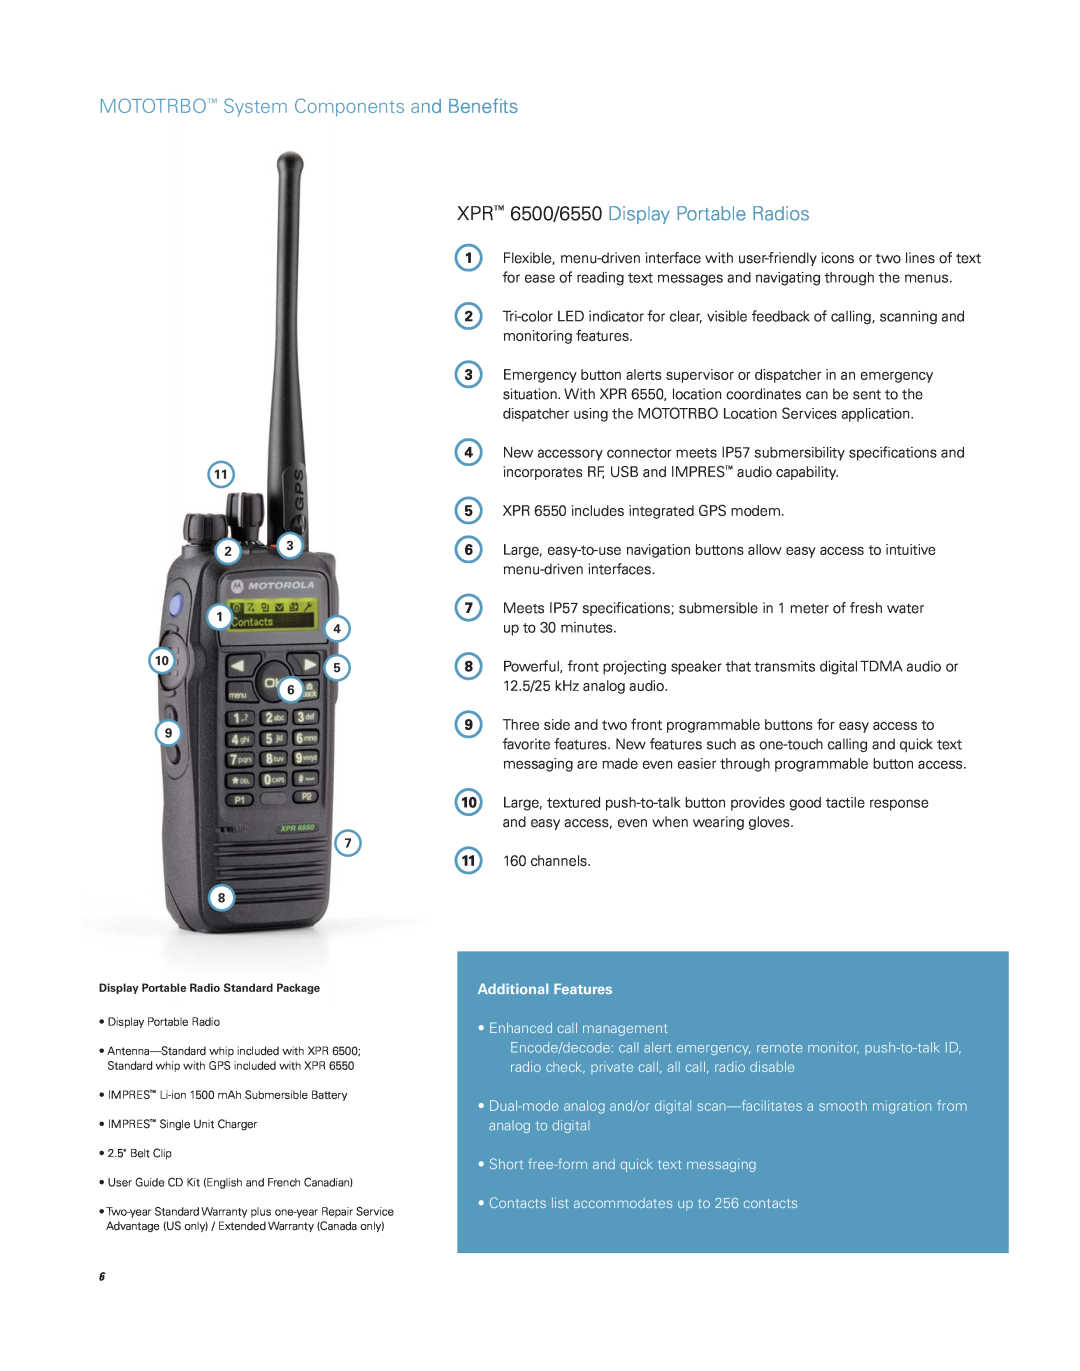 Motorola Professional Digital Two-Way Radio System MOTOTRBO System Components and Beneﬁts, Enhanced call management 